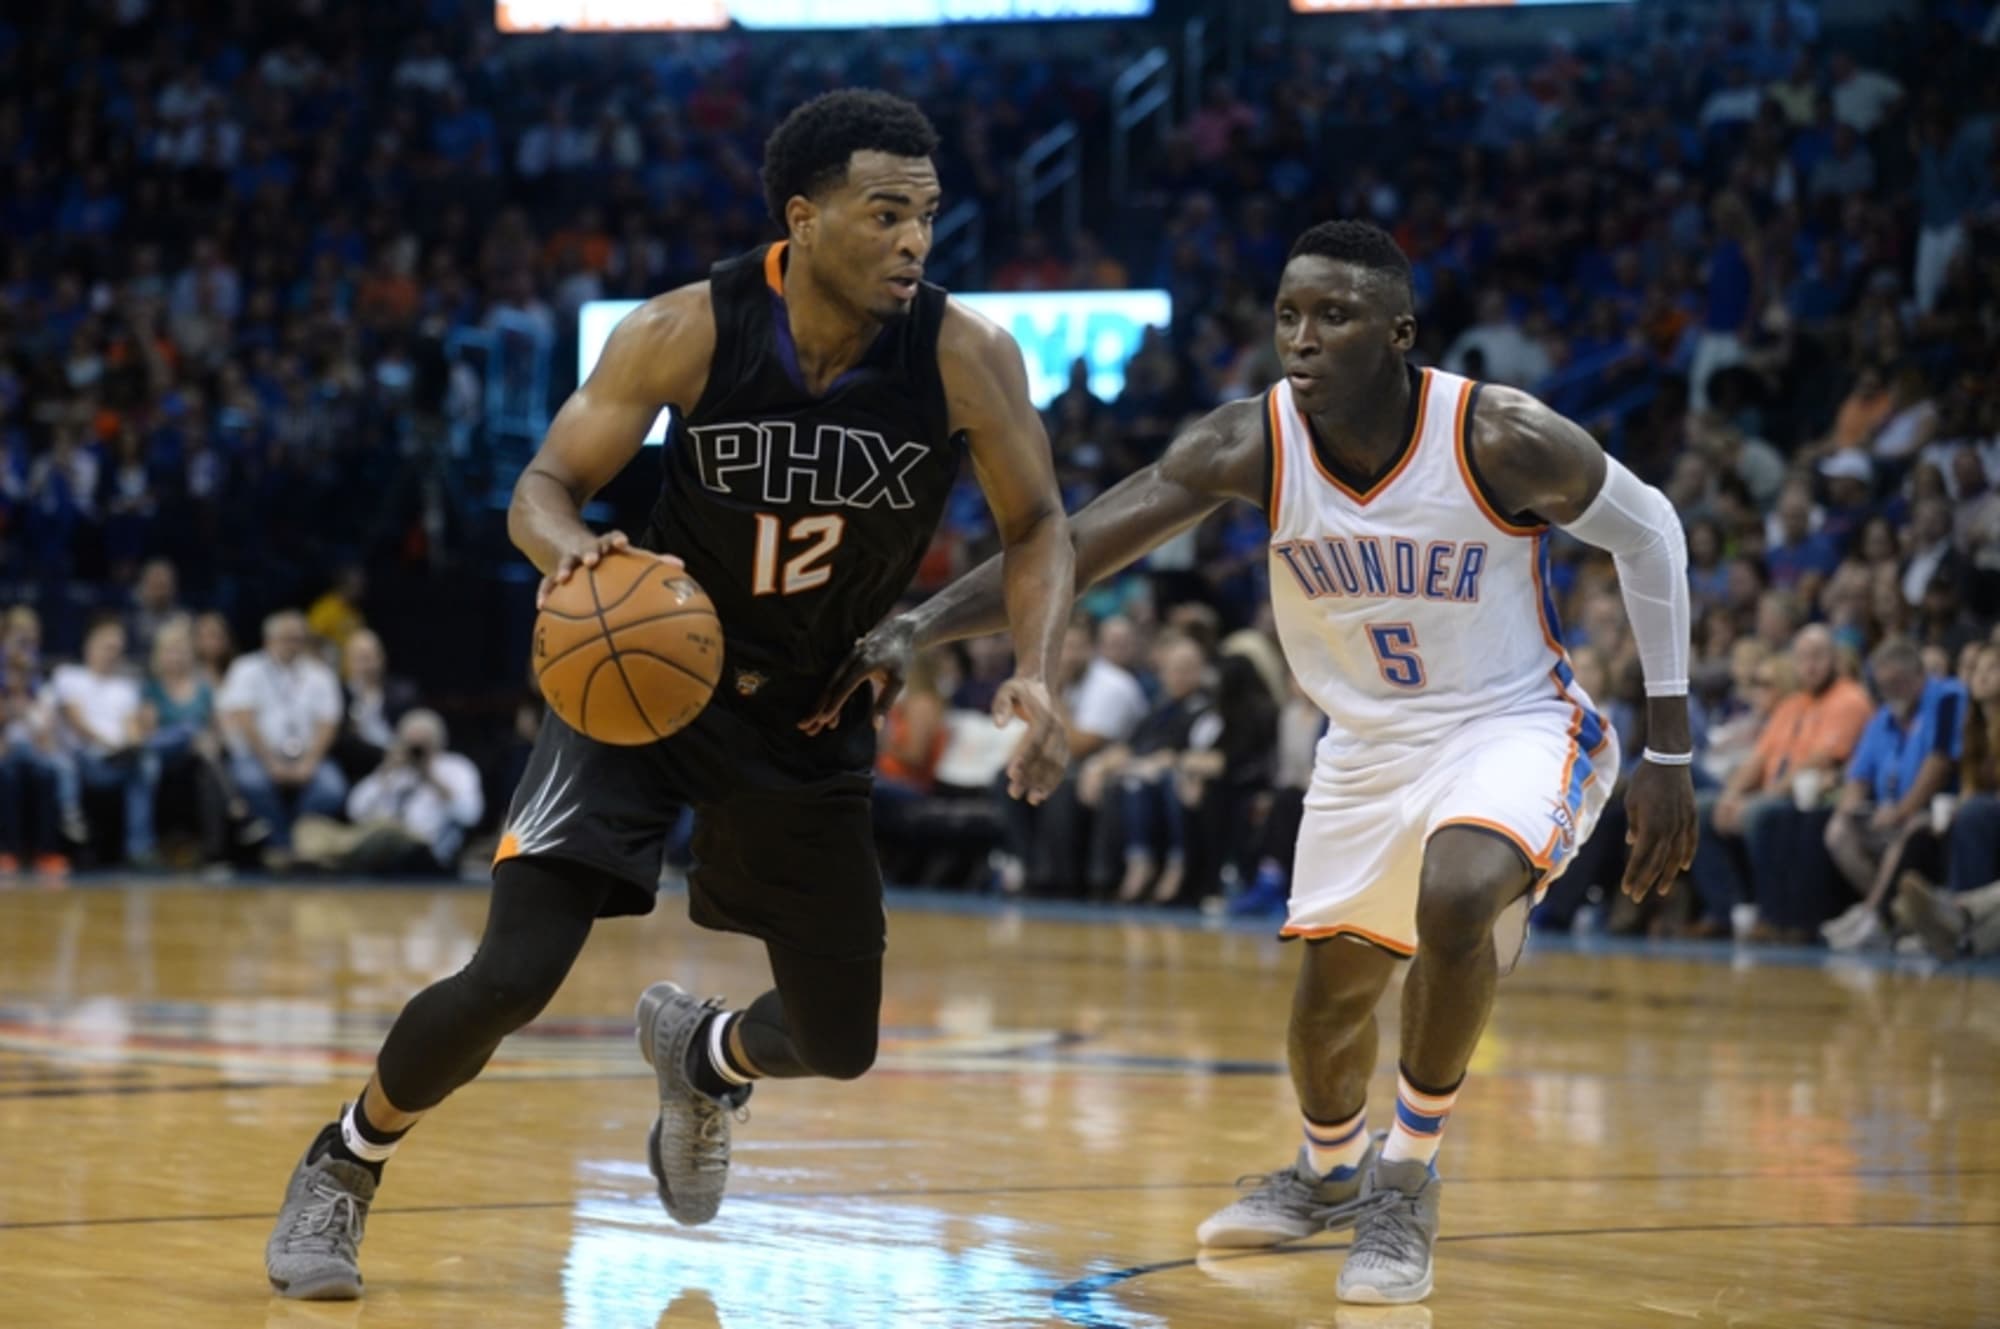 Lakers play uninspired in loss to Thunder with another night of